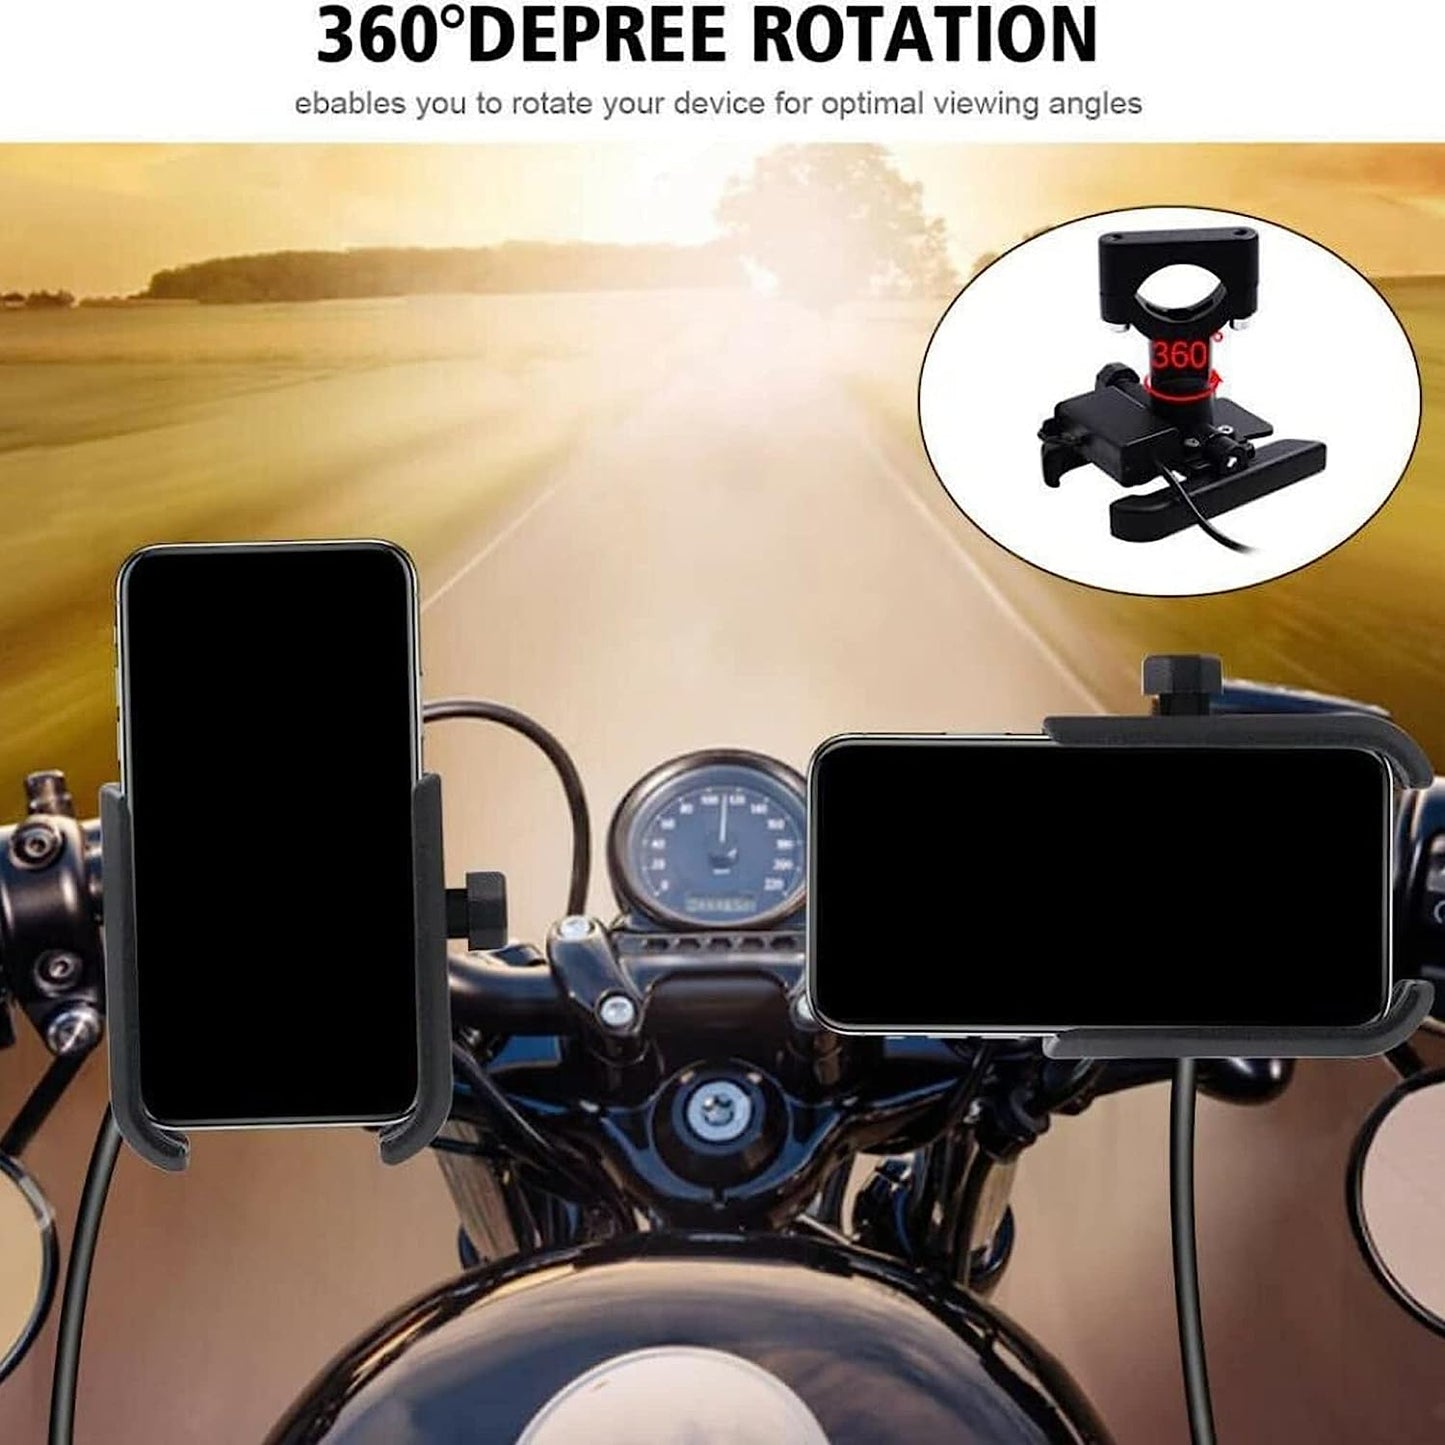 EYUVAA Heavy Metal Mobile Holder for Bikes | 360° Rotation Motorcycle Handlebar Bicycle Phone Mount Mobile Stand for Bike Ideal for Maps and GPS Navigation (Black)